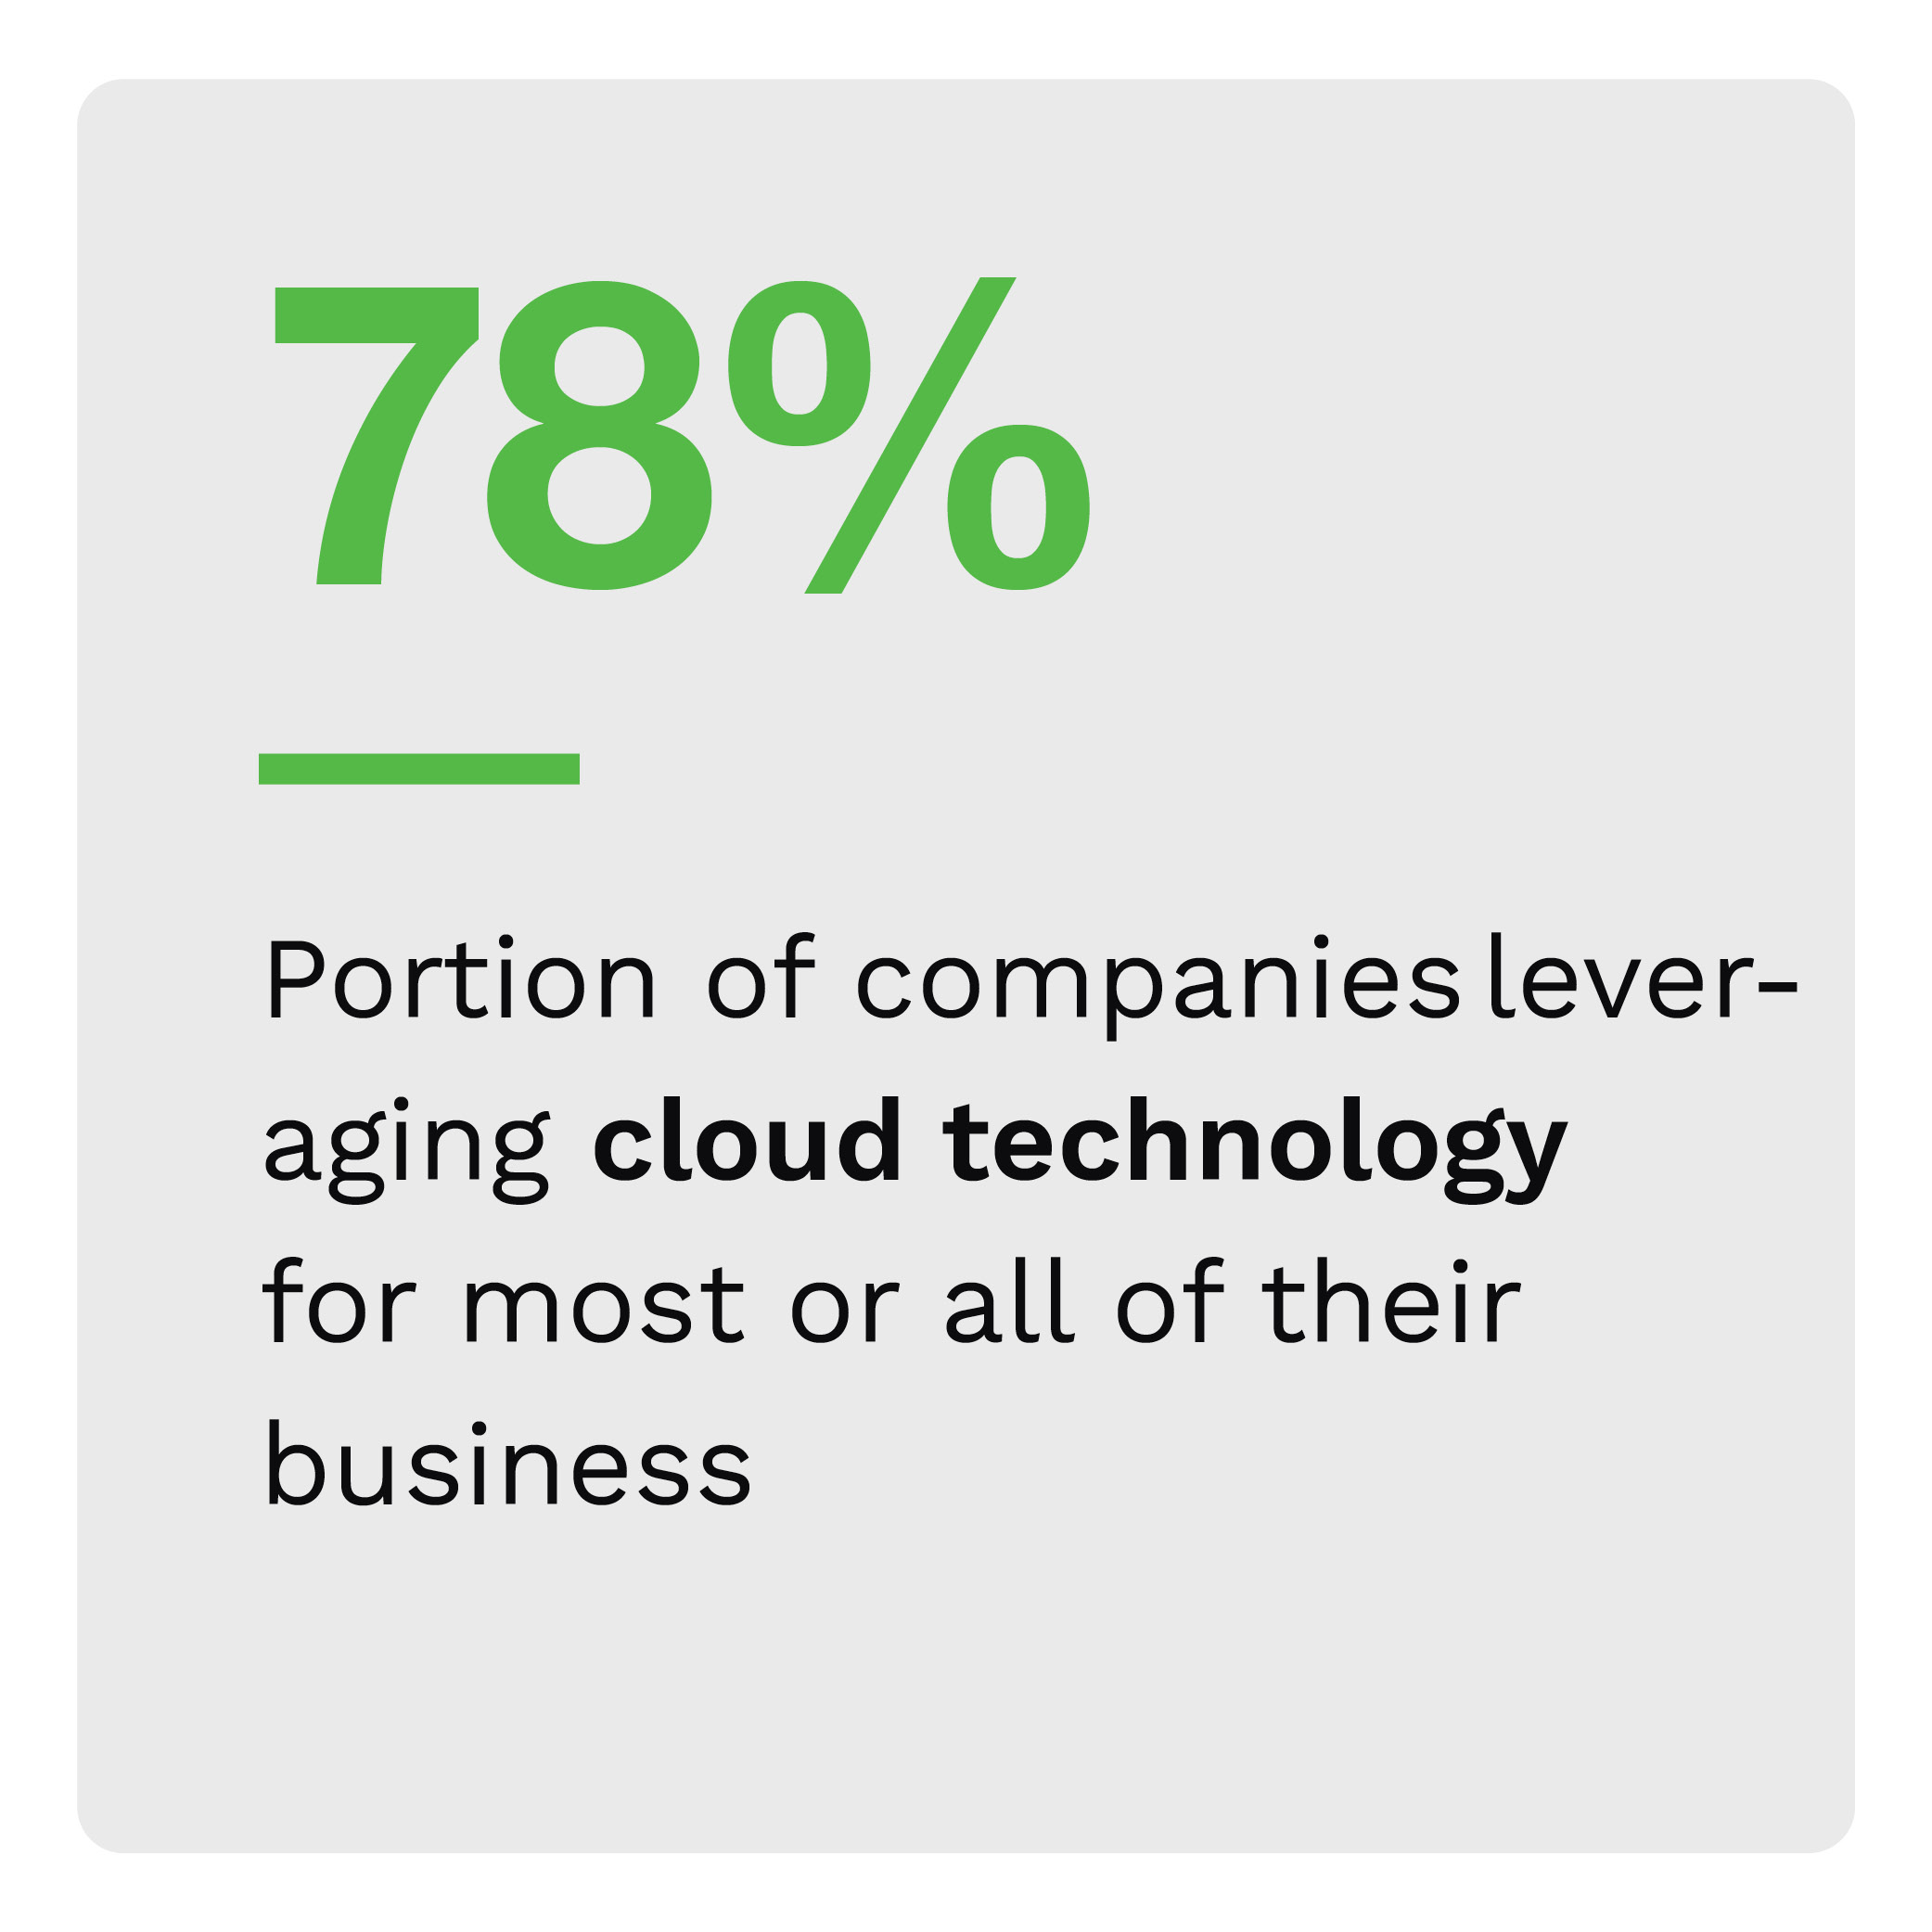 78%: Portion of companies leveraging cloud technology for most or all of their business